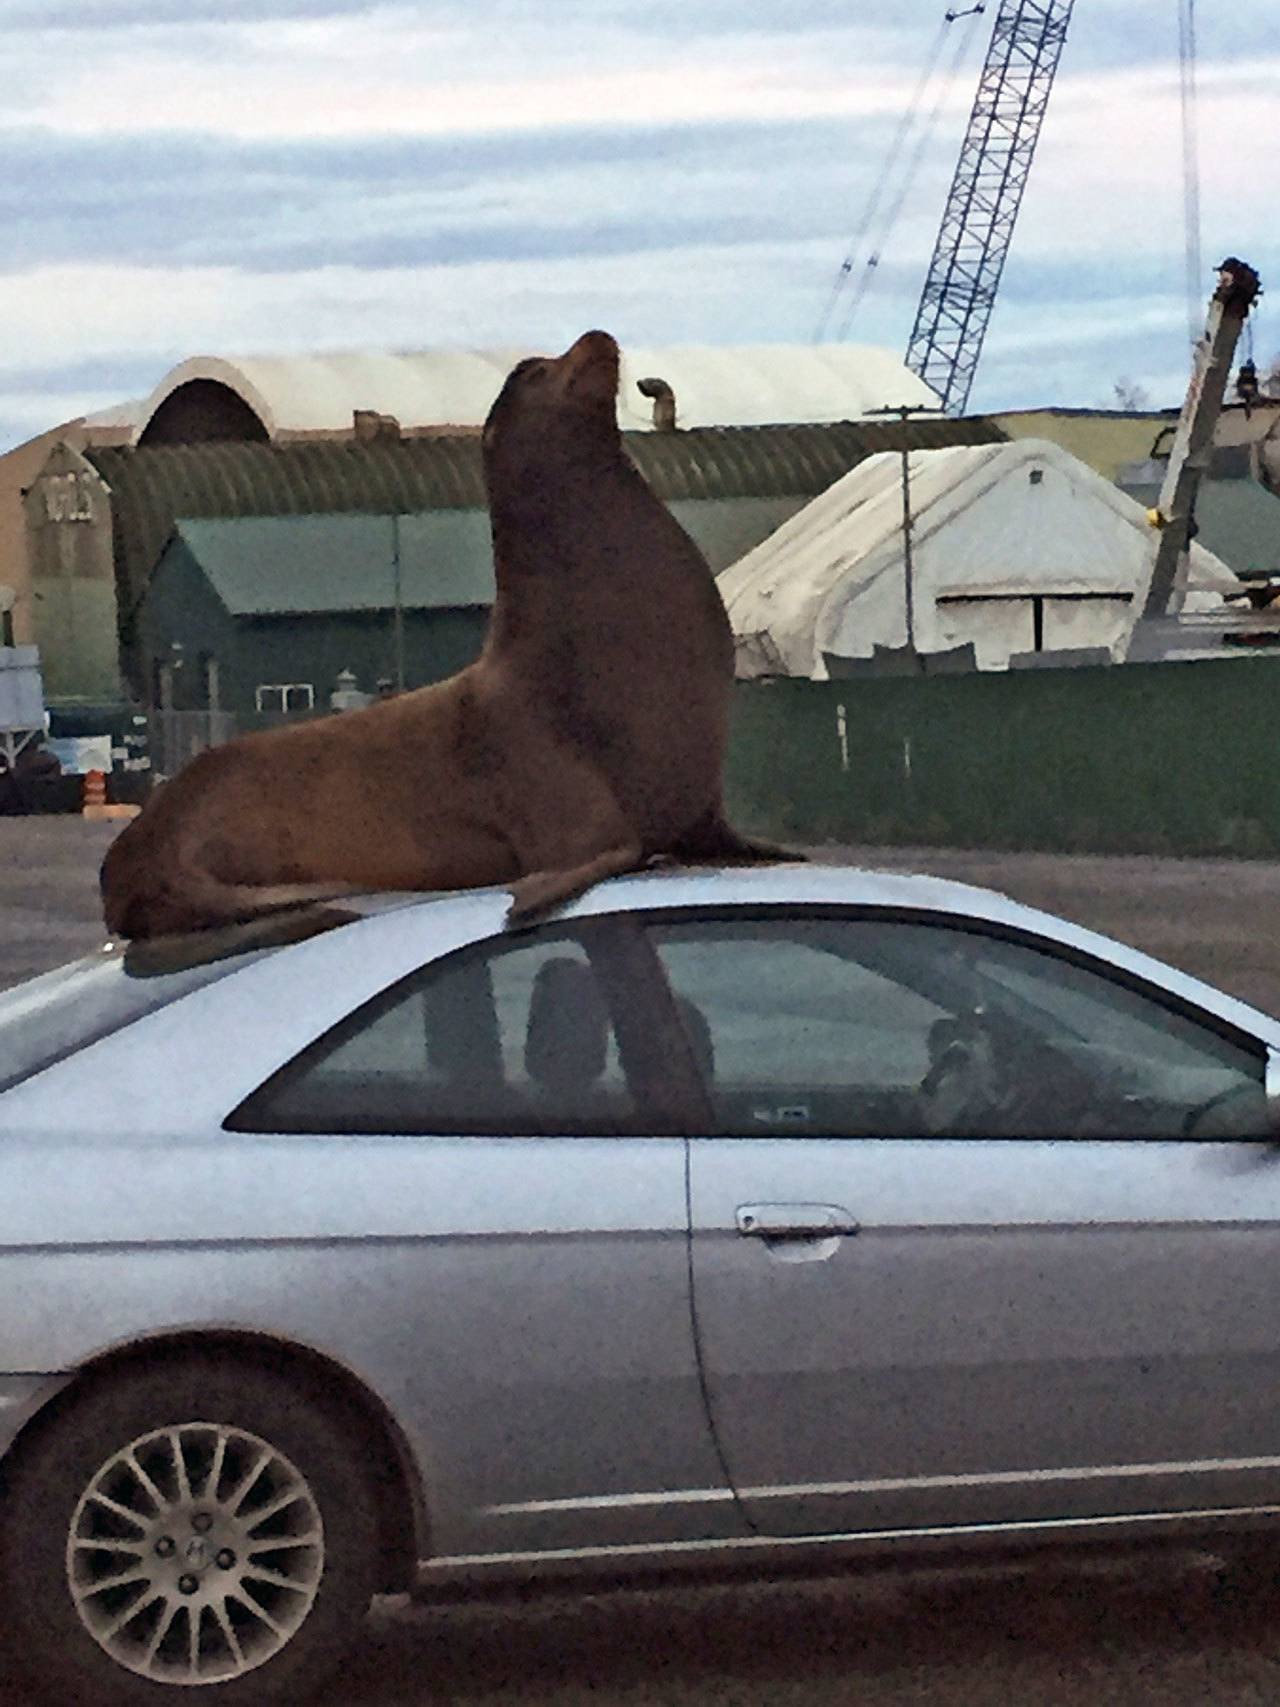 Megan Hansen / Whidbey News Group — A California sea lion perches atop a small Honda at Nichols Brothers Boat Builders on Saturday. That animal spent the day around the yard, capturing the attention of locals and news organizations around the country.